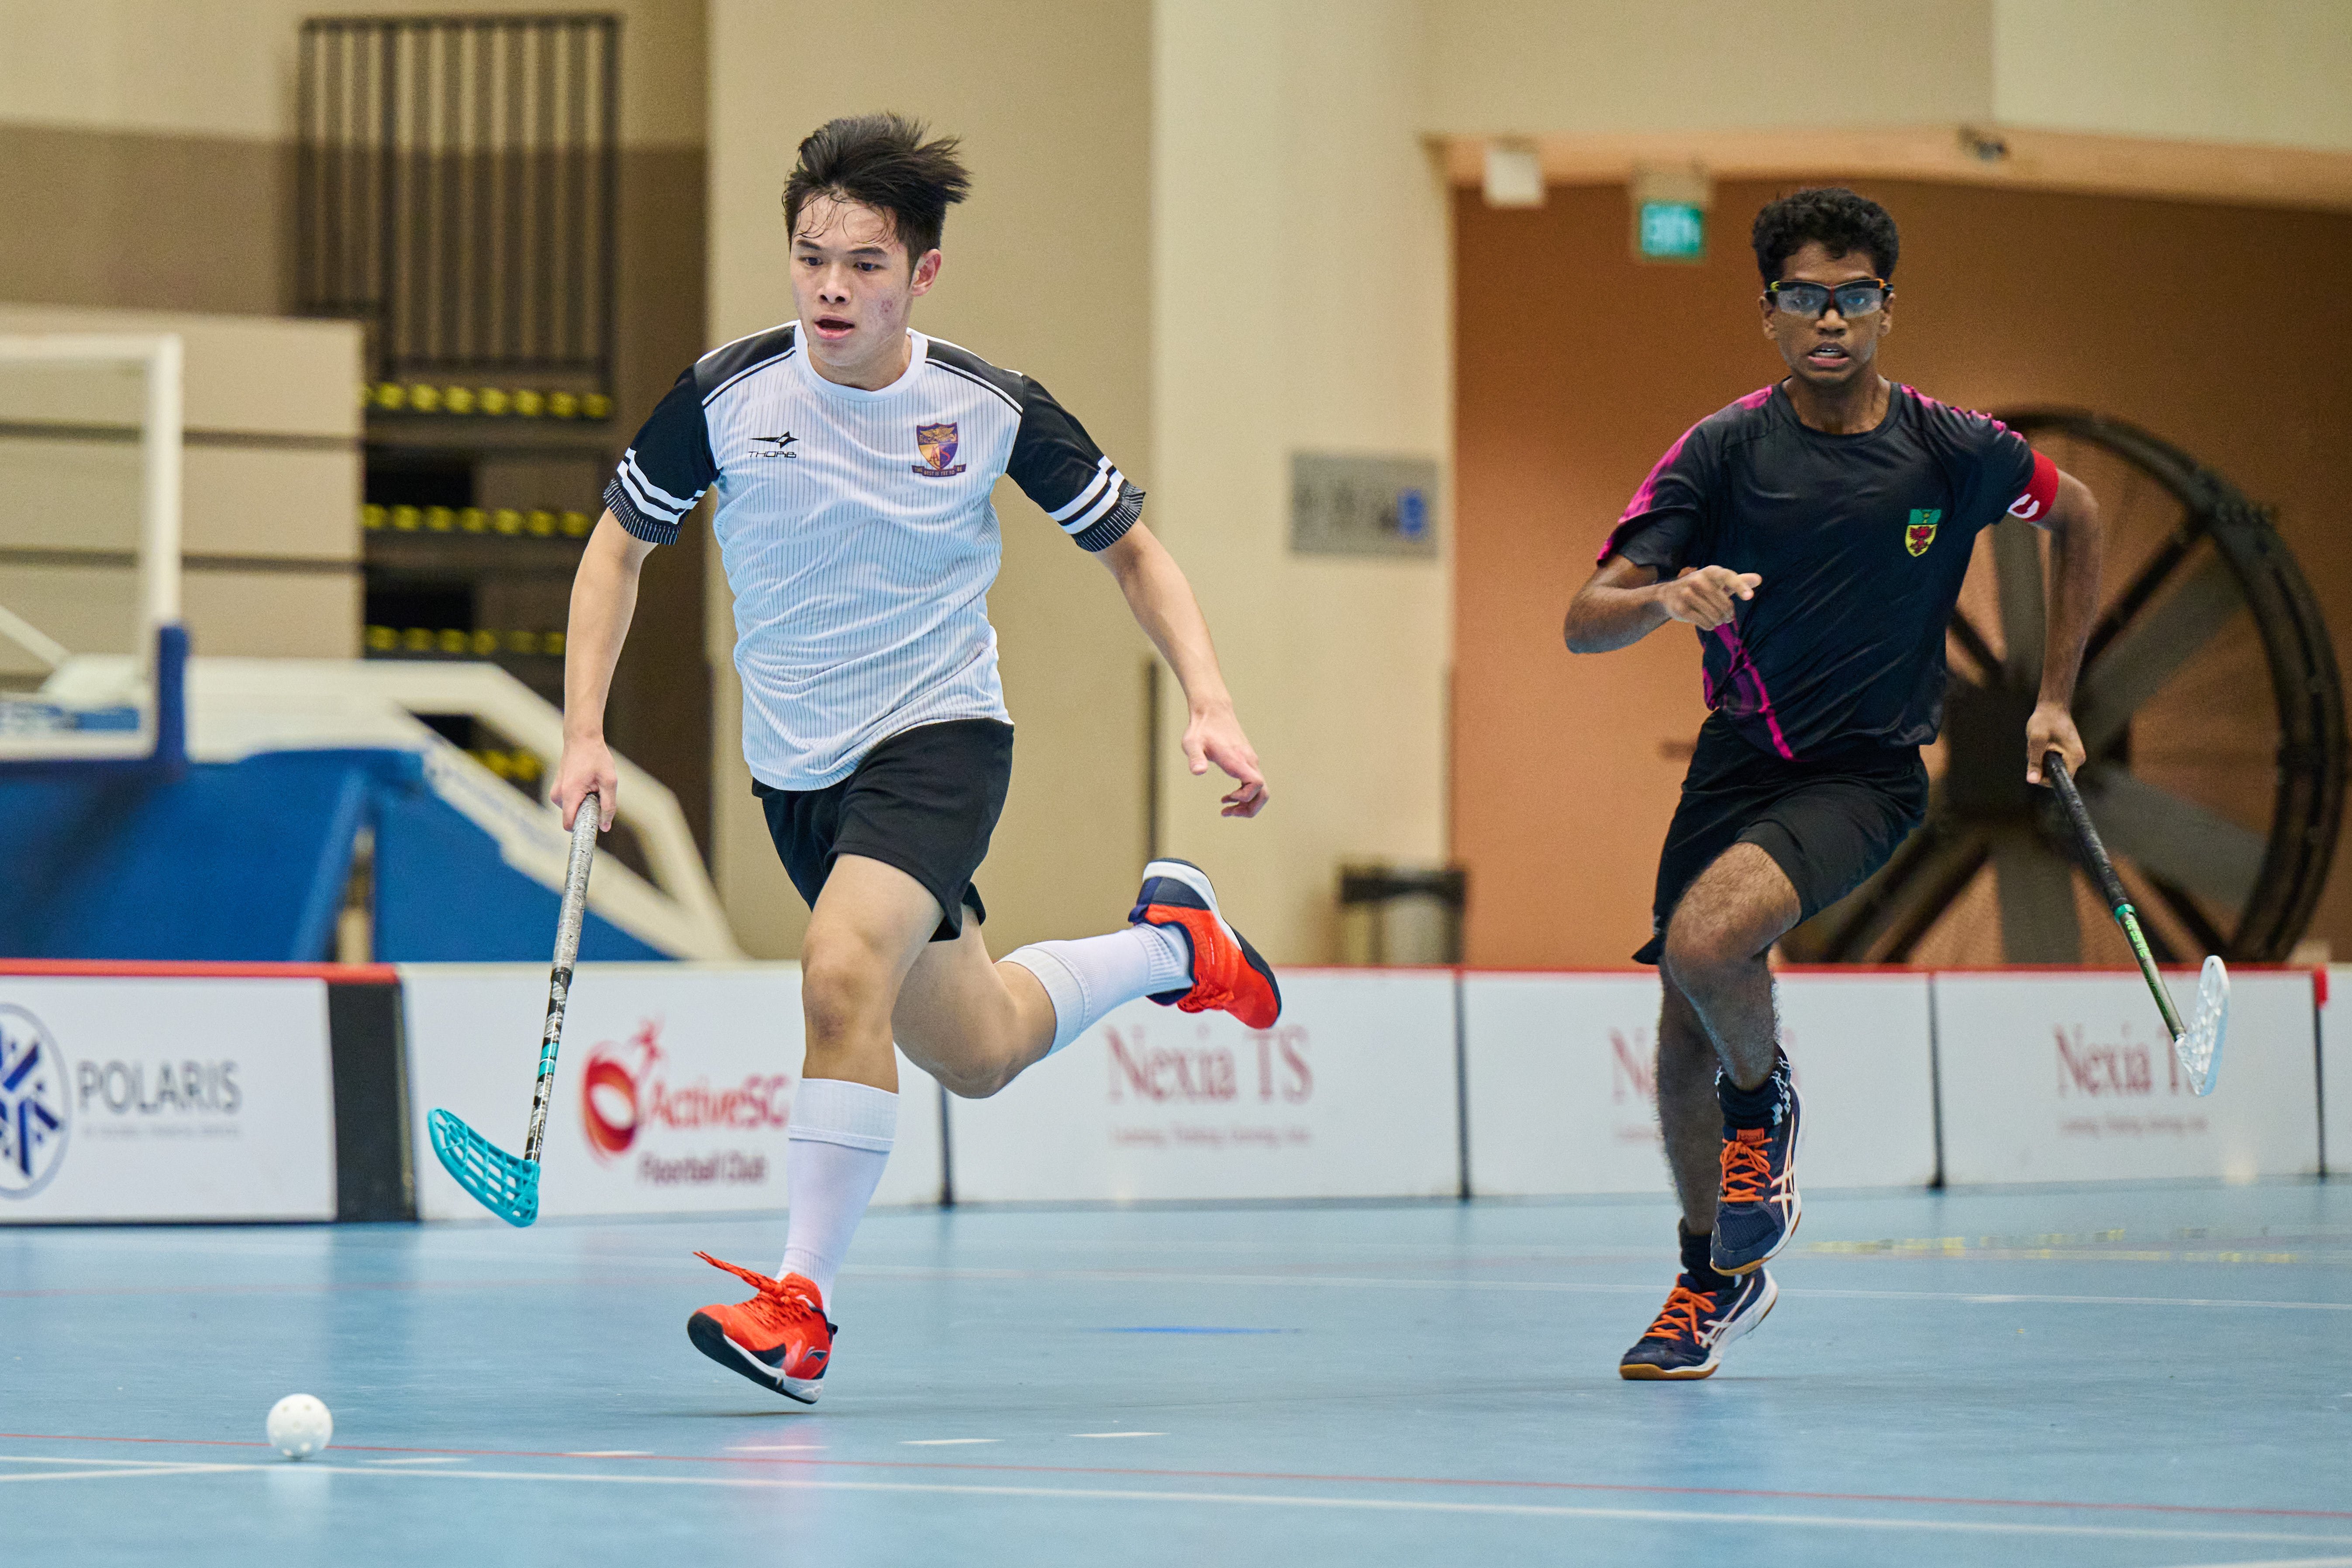 20220519_20220519 SSSC Floorball National A Div Boys Semi Finals Raffles Junior College Vs Anglo-Chinese Junior College_Siaw Woon Chong_0027